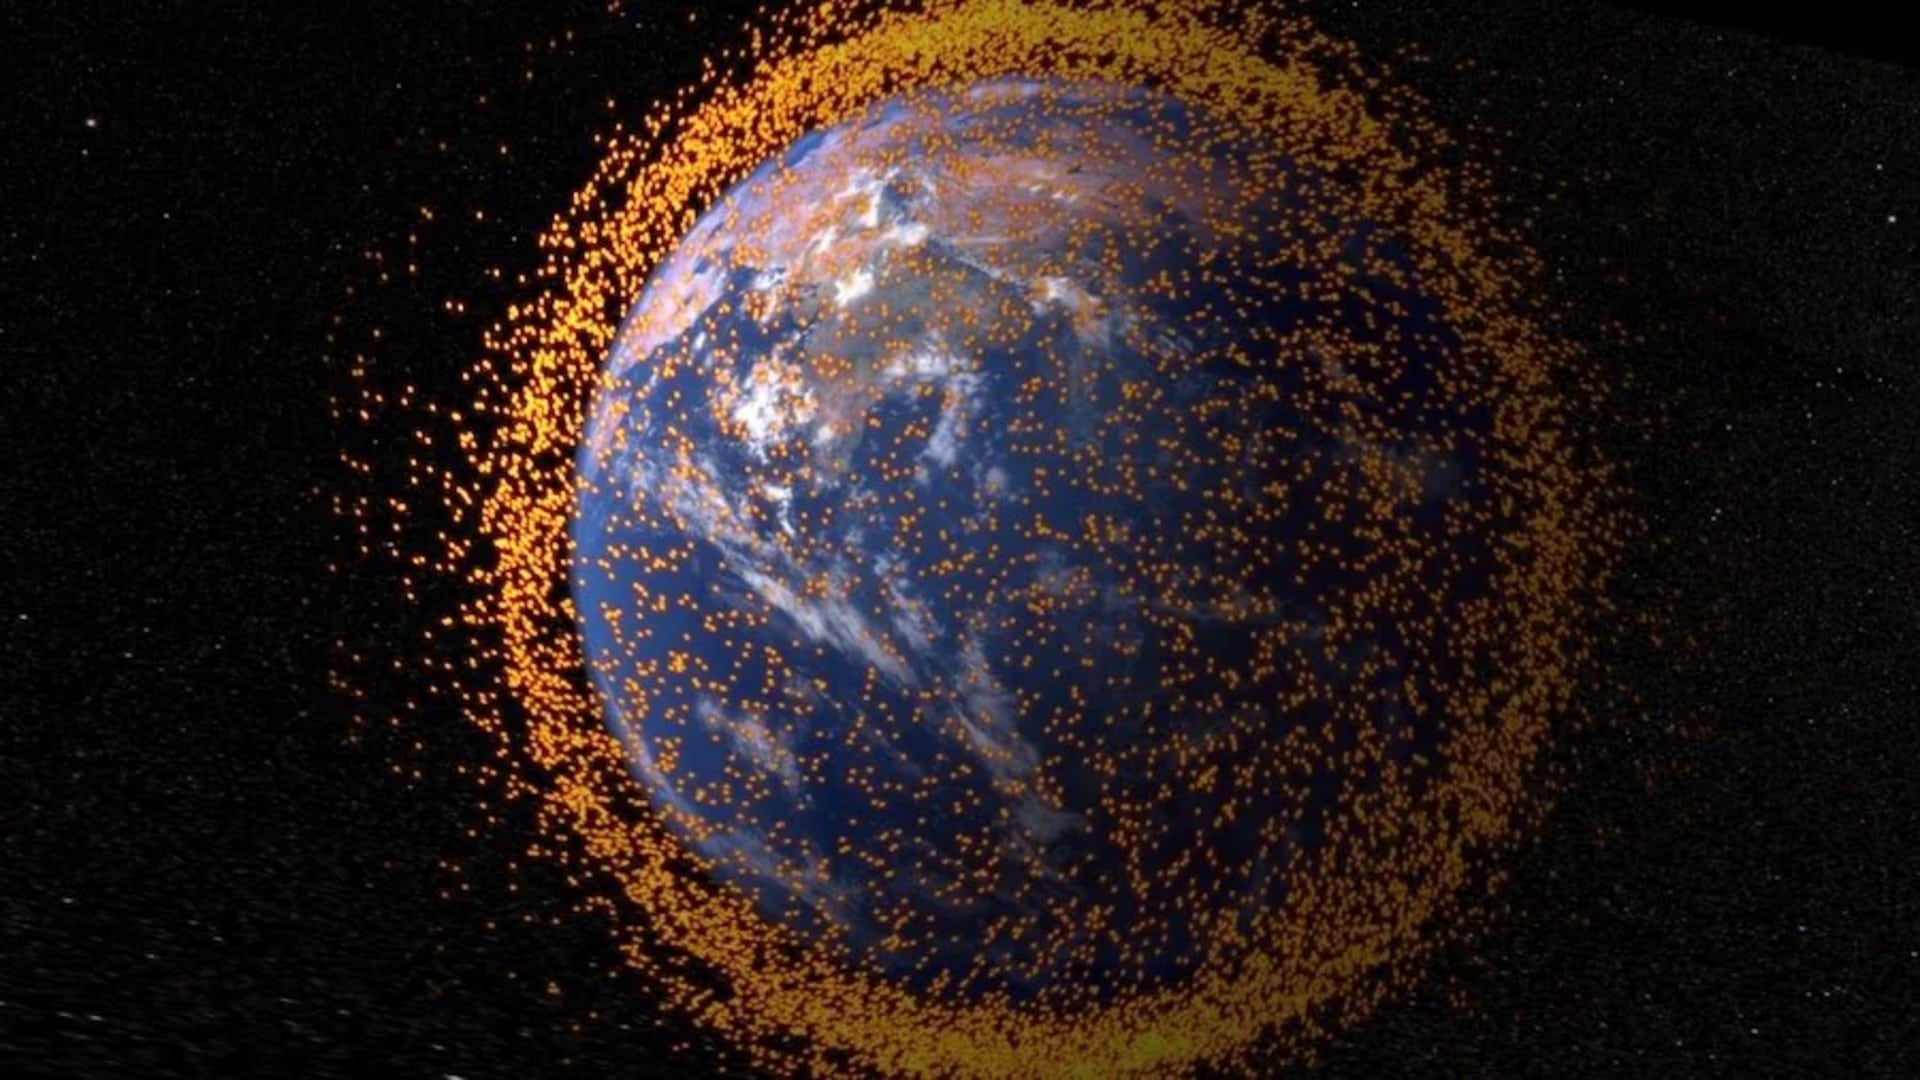 A Simple Tool For Cleaning Up Space Junk From Low Earth Orbit May Soon Is A Reality!